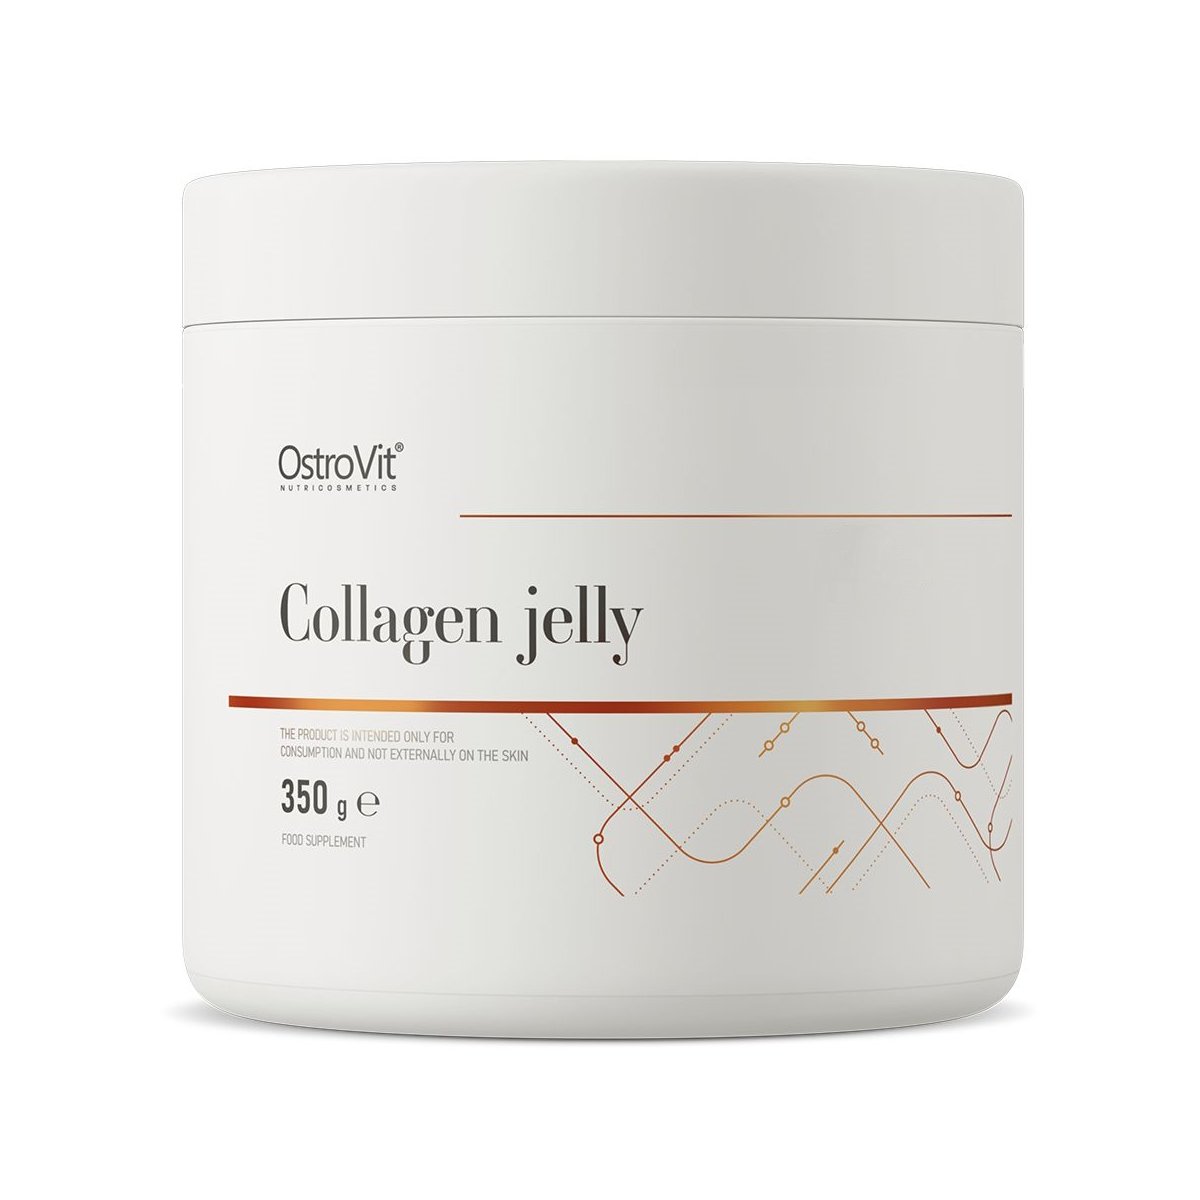 Препарат для суставов и связок OstroVit Collagen Jelly, 350 грамм Зеленое яблоко,  ml, OstroVit. For joints and ligaments. General Health Ligament and Joint strengthening 